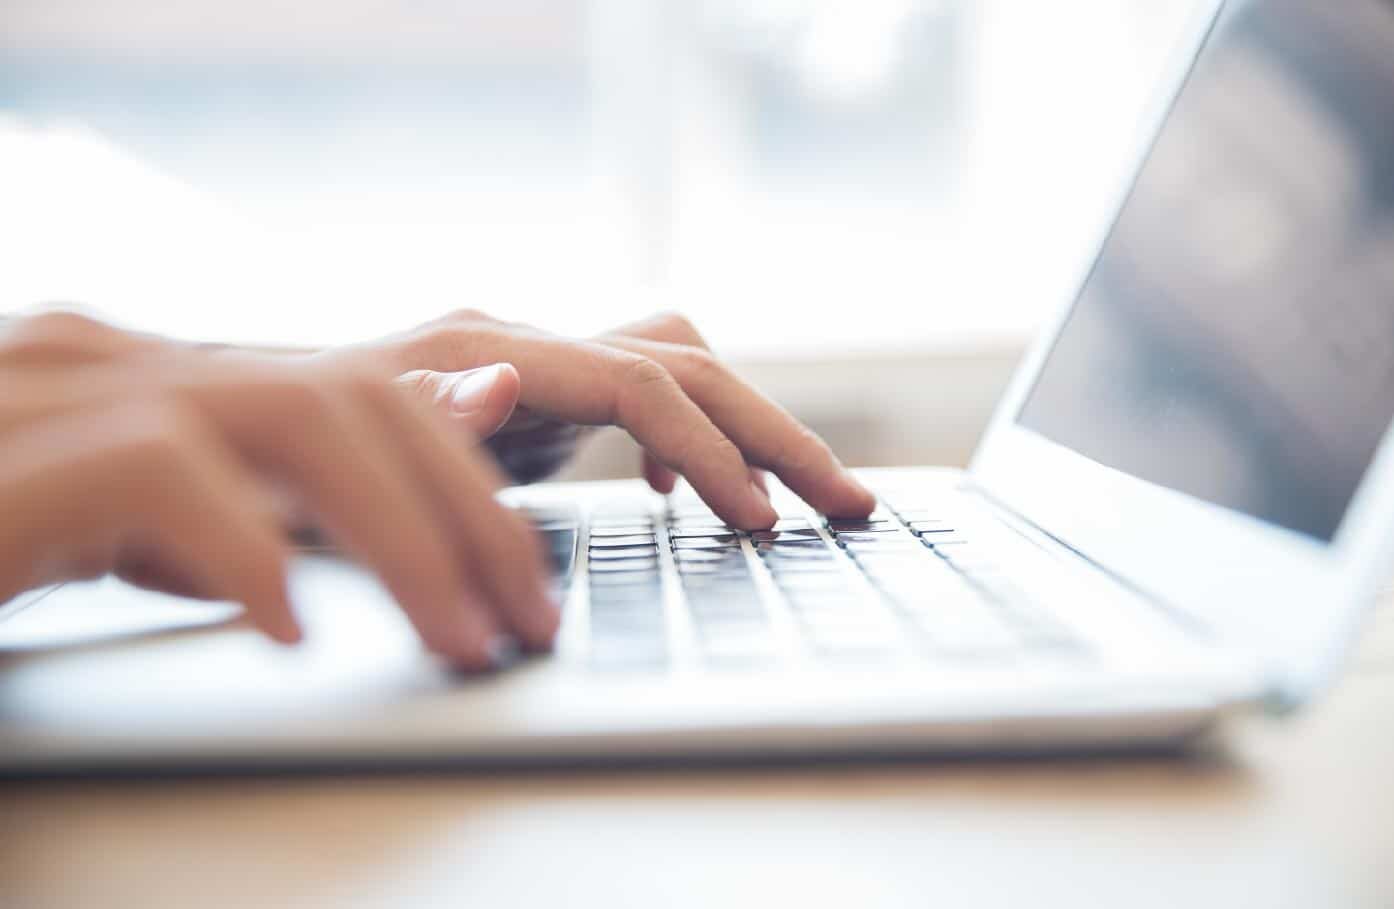 A close up image of hands typing on a laptop in a brightly lit setting.